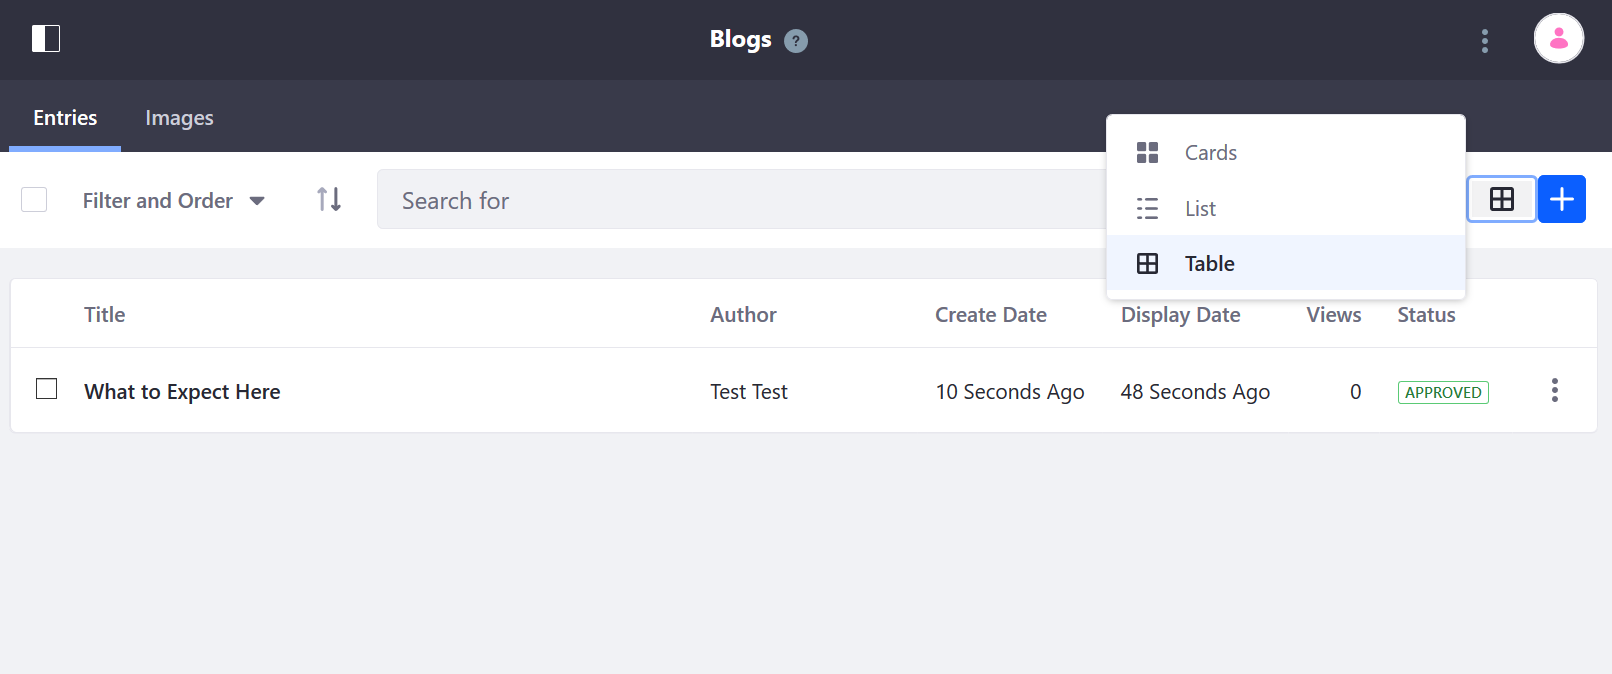 See the different View Types in the Site Administration Blogs Menu